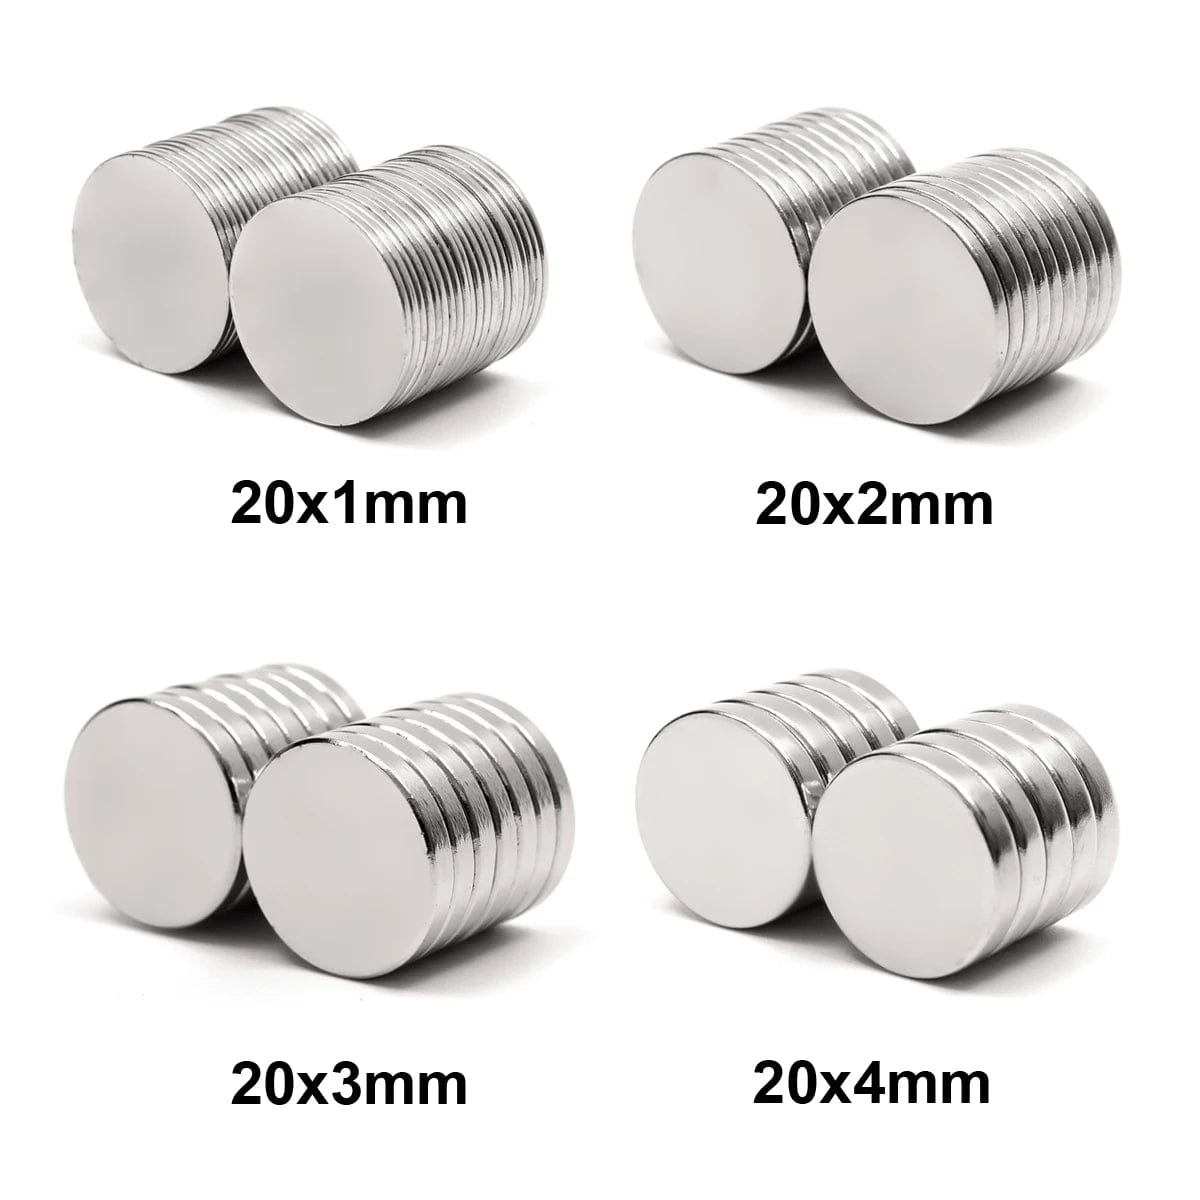 ZOOFOXS 20x1 20x2 20x3 20x4 20x5 20x10 20x20mm Small Round Neodymium Magnets N35 Strong Permanet Rare Earth Magnet Disc